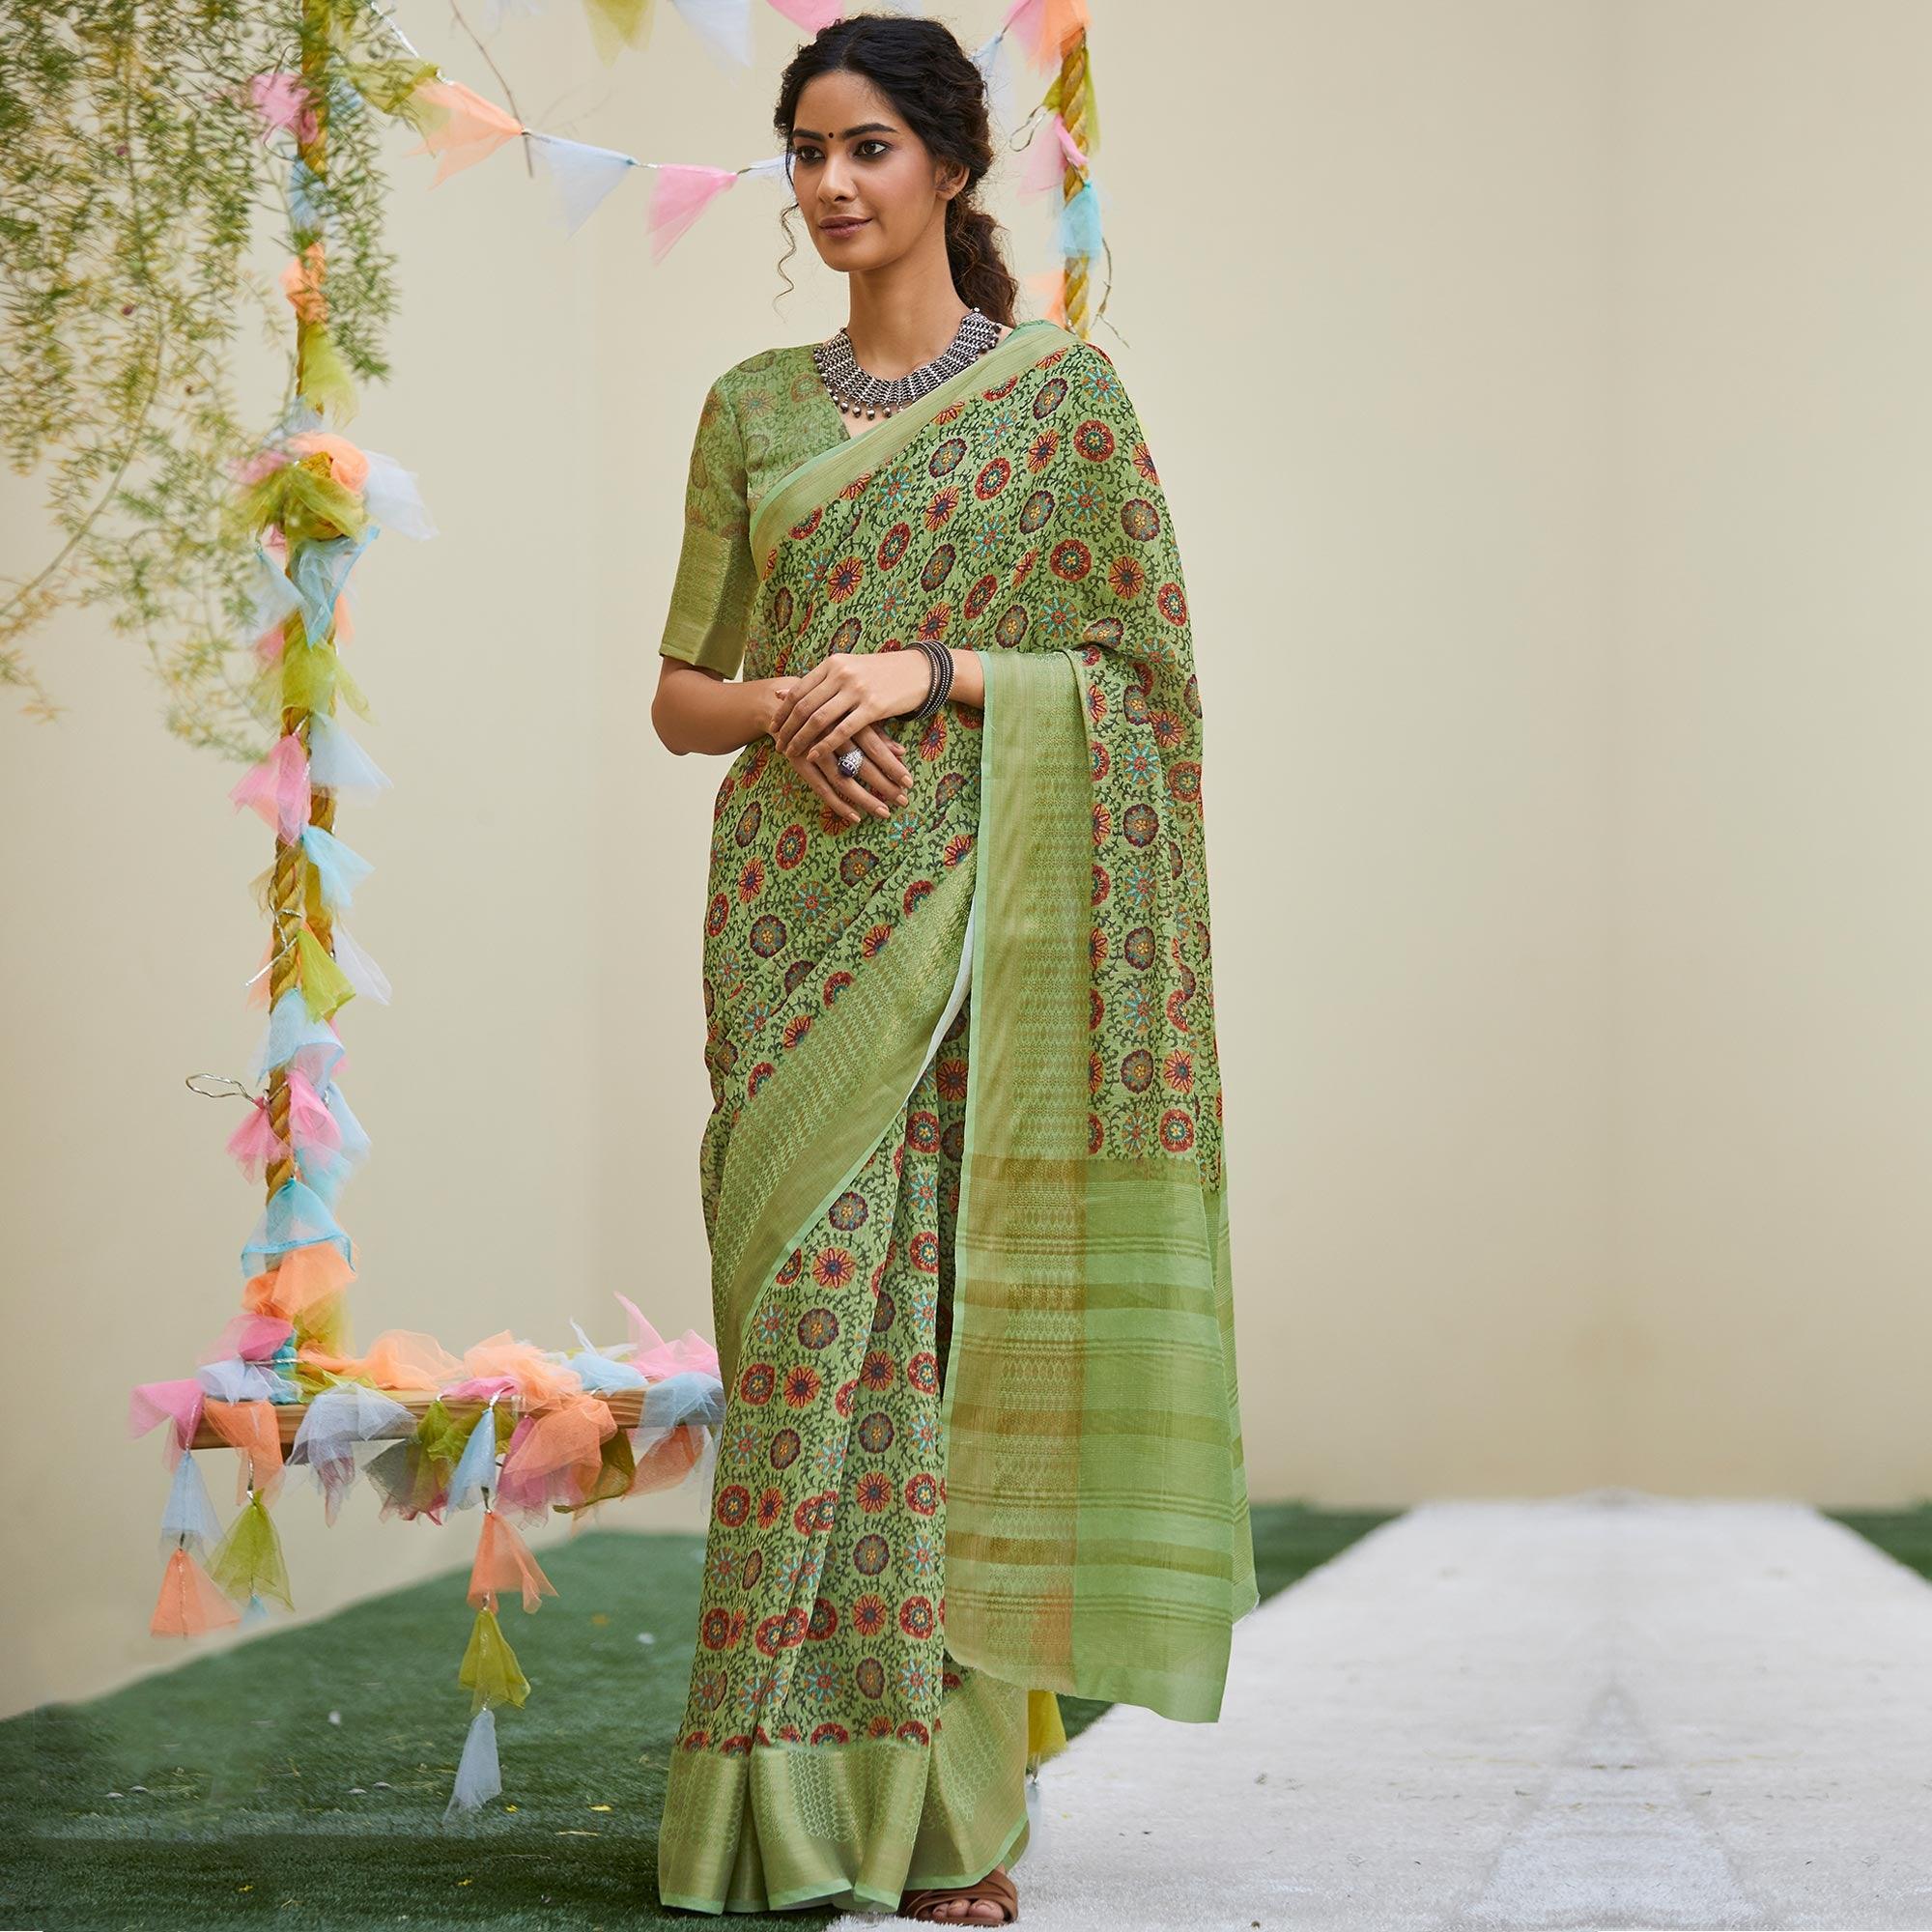 Engrossing Green Colored Party Wear Digital Printed Linen Saree - Peachmode